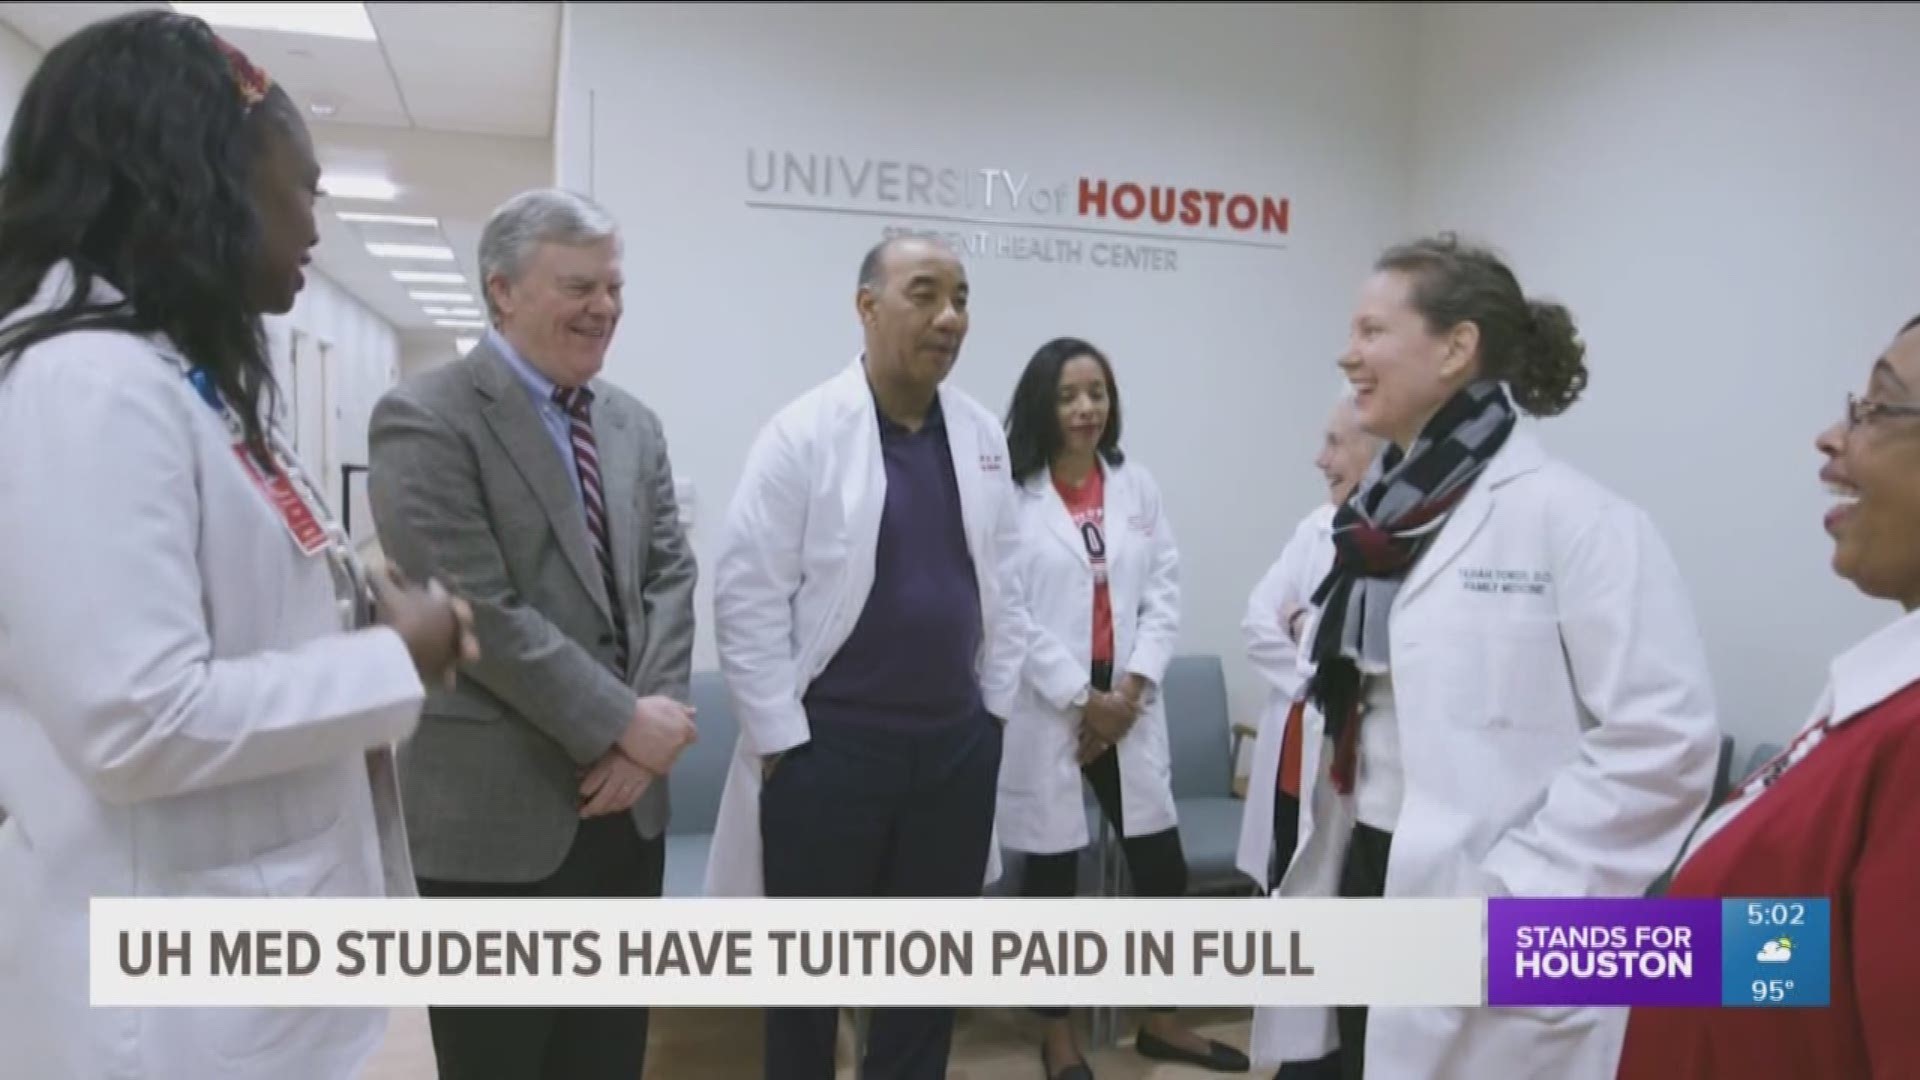 The University of Houston announced Wednesday the tuition for its inaugural medical school class will be free for those students, thank to an anonymous $3 million gift.